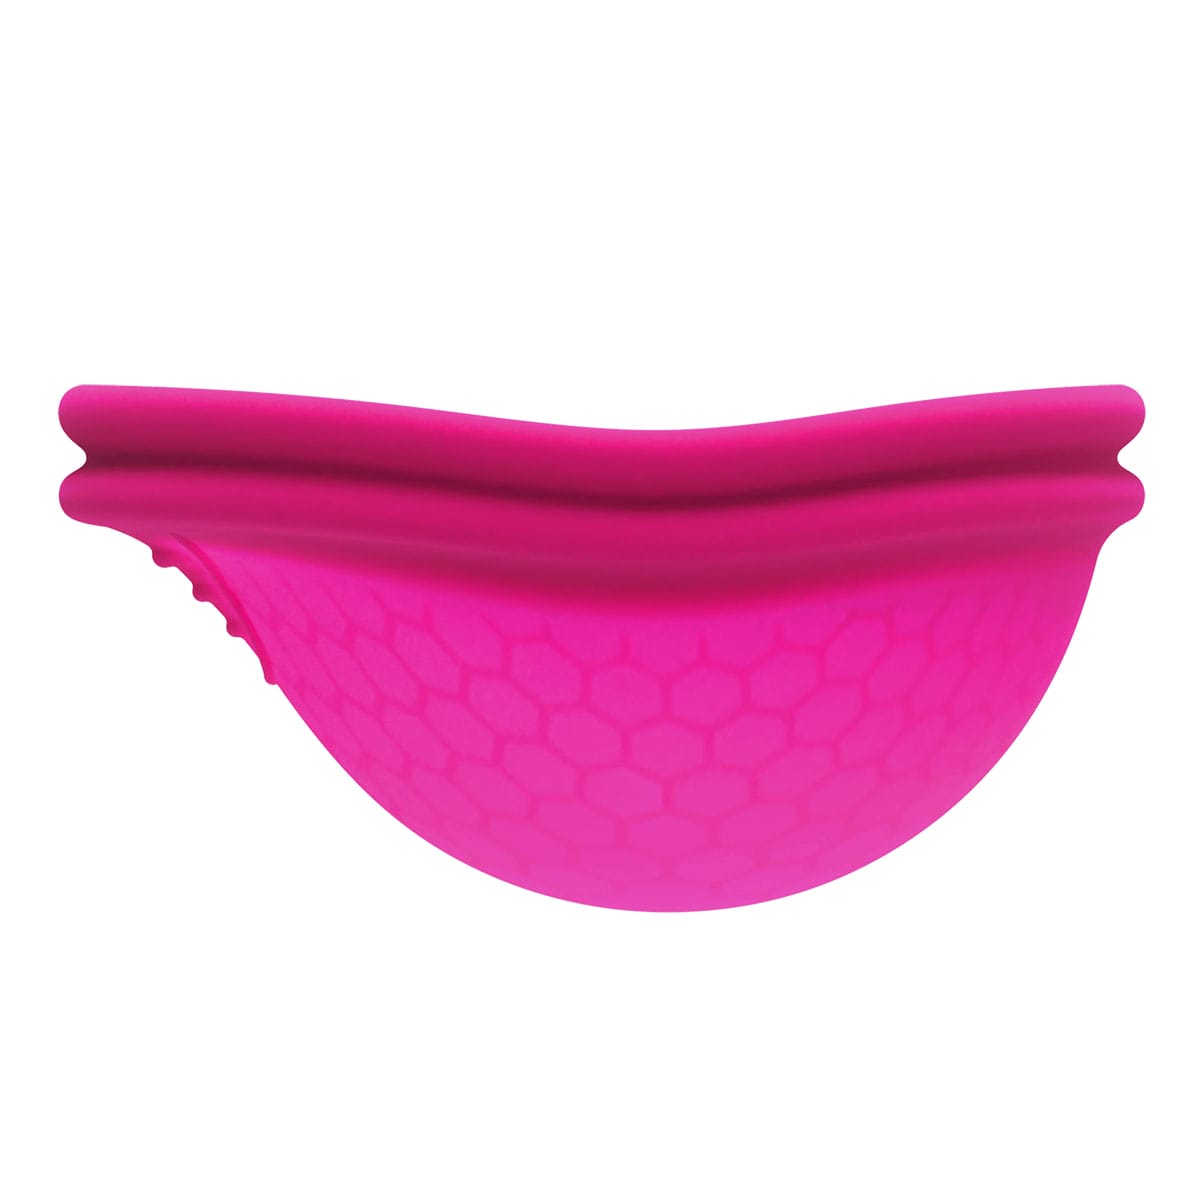 Buy Intimina Ziggy Cup 2   Size B menstruation cups for your next cycle.